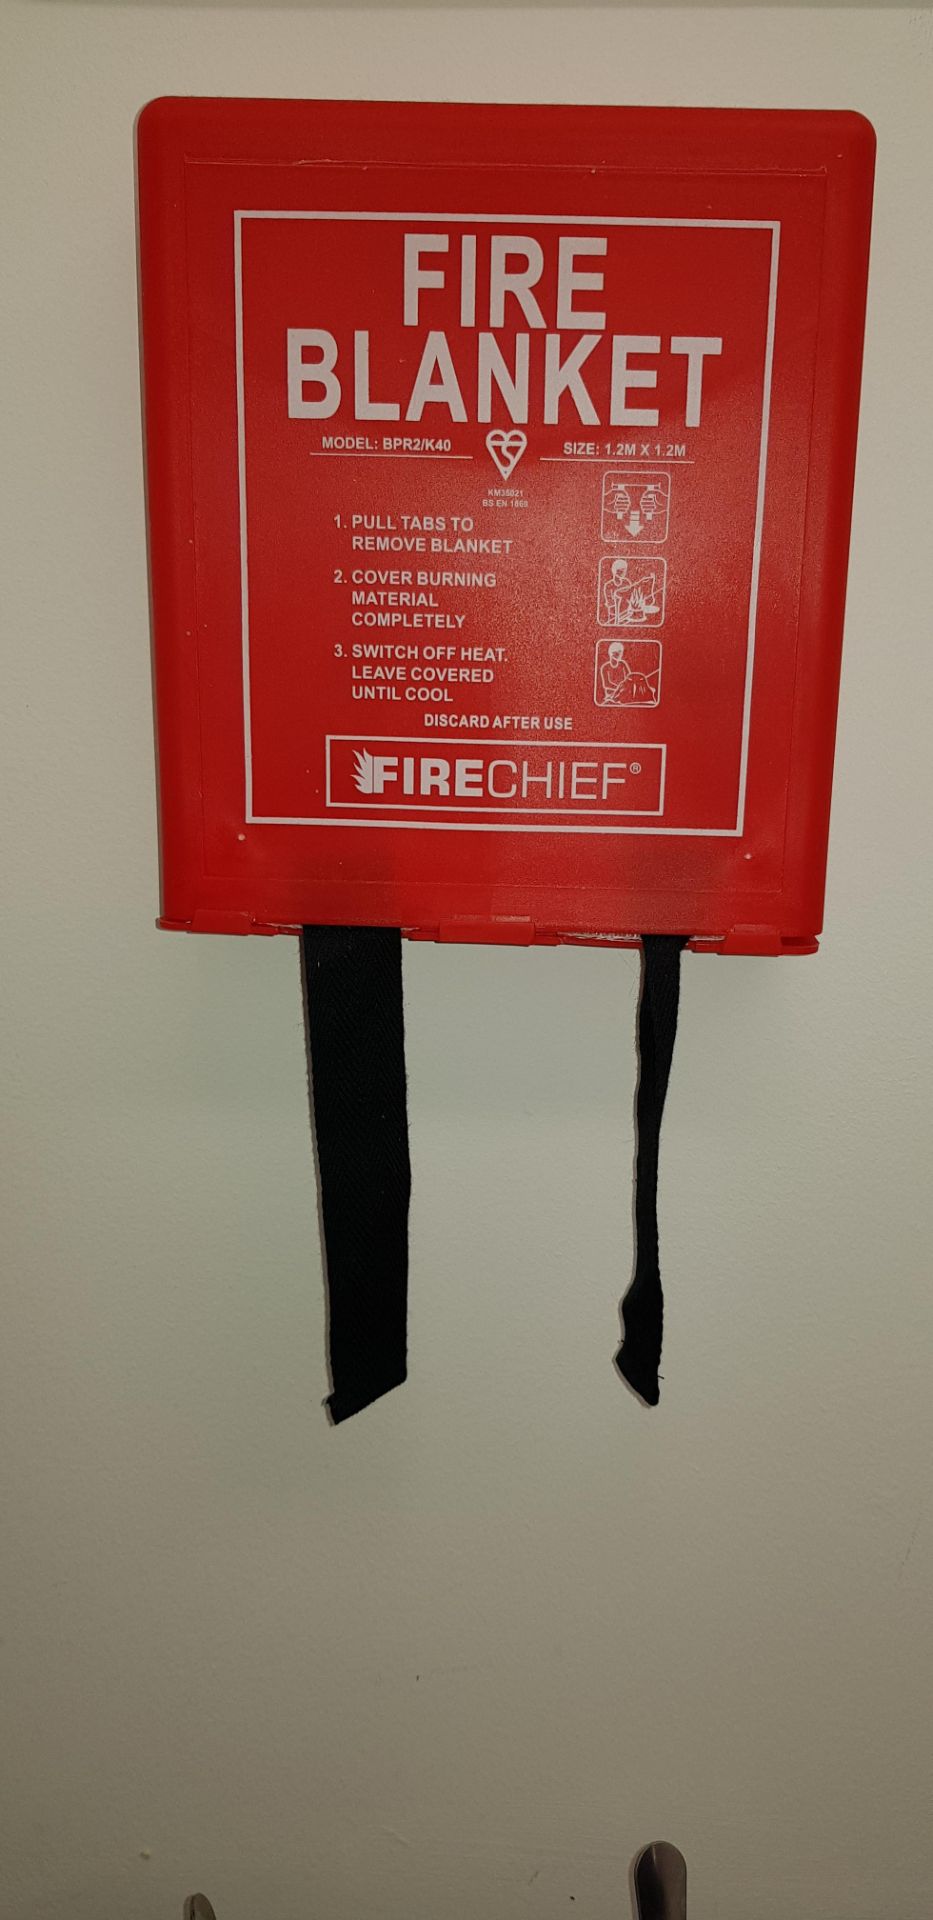 2 x Dry Powder Fire Extinguishers and Fire Blanket - Image 2 of 2